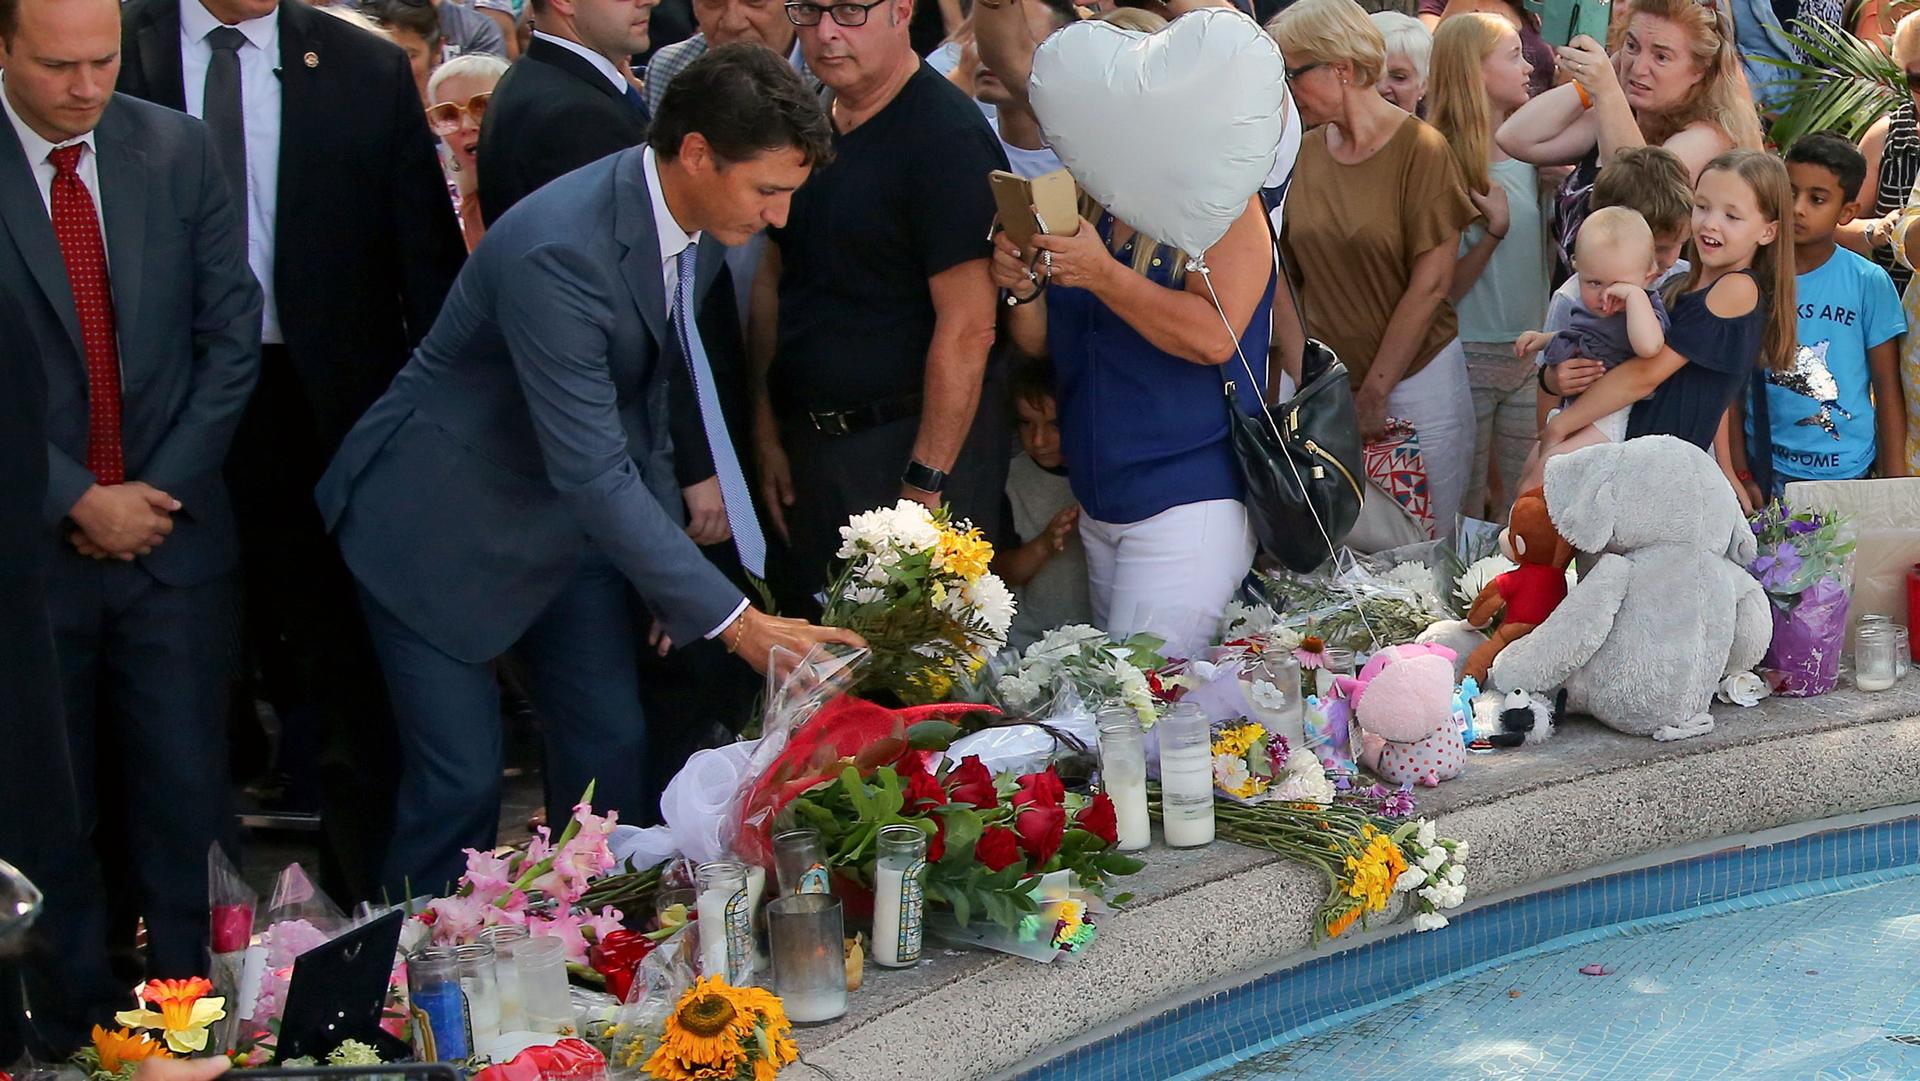 Canada's Prime Minister Justin Trudeau lays flowers at the site of a mass shooting. Around him is a large crowd assembled for a vigil.